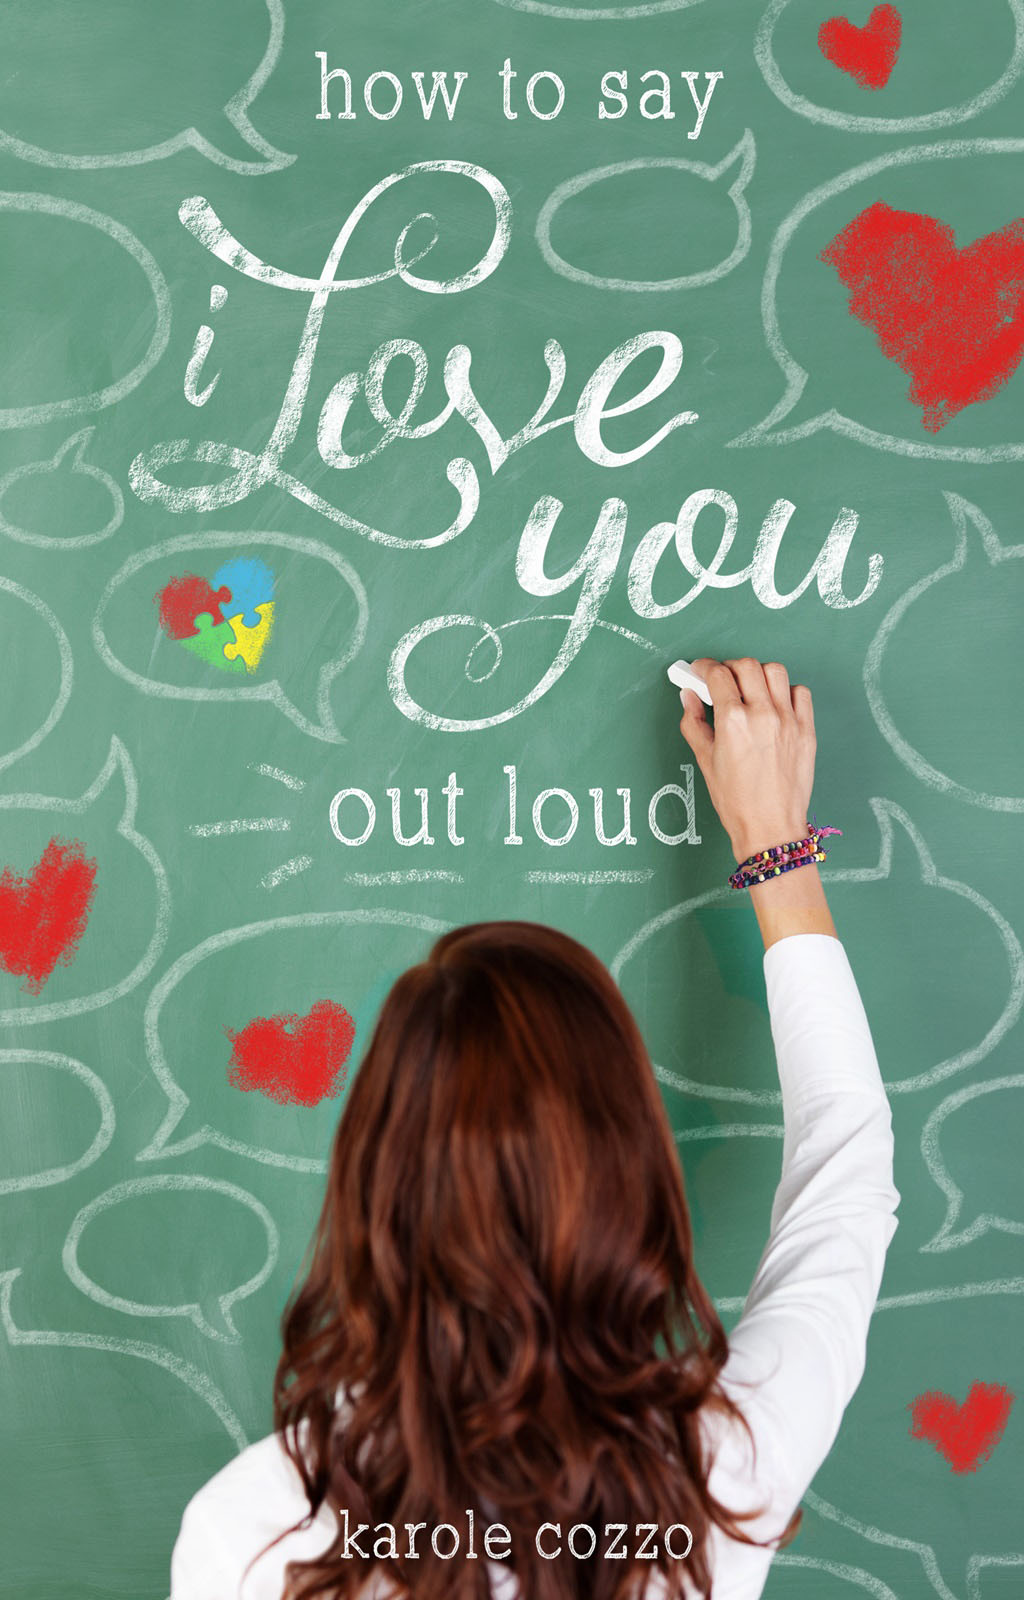 How to Say I Love You Out Loud by Karole Cozzo